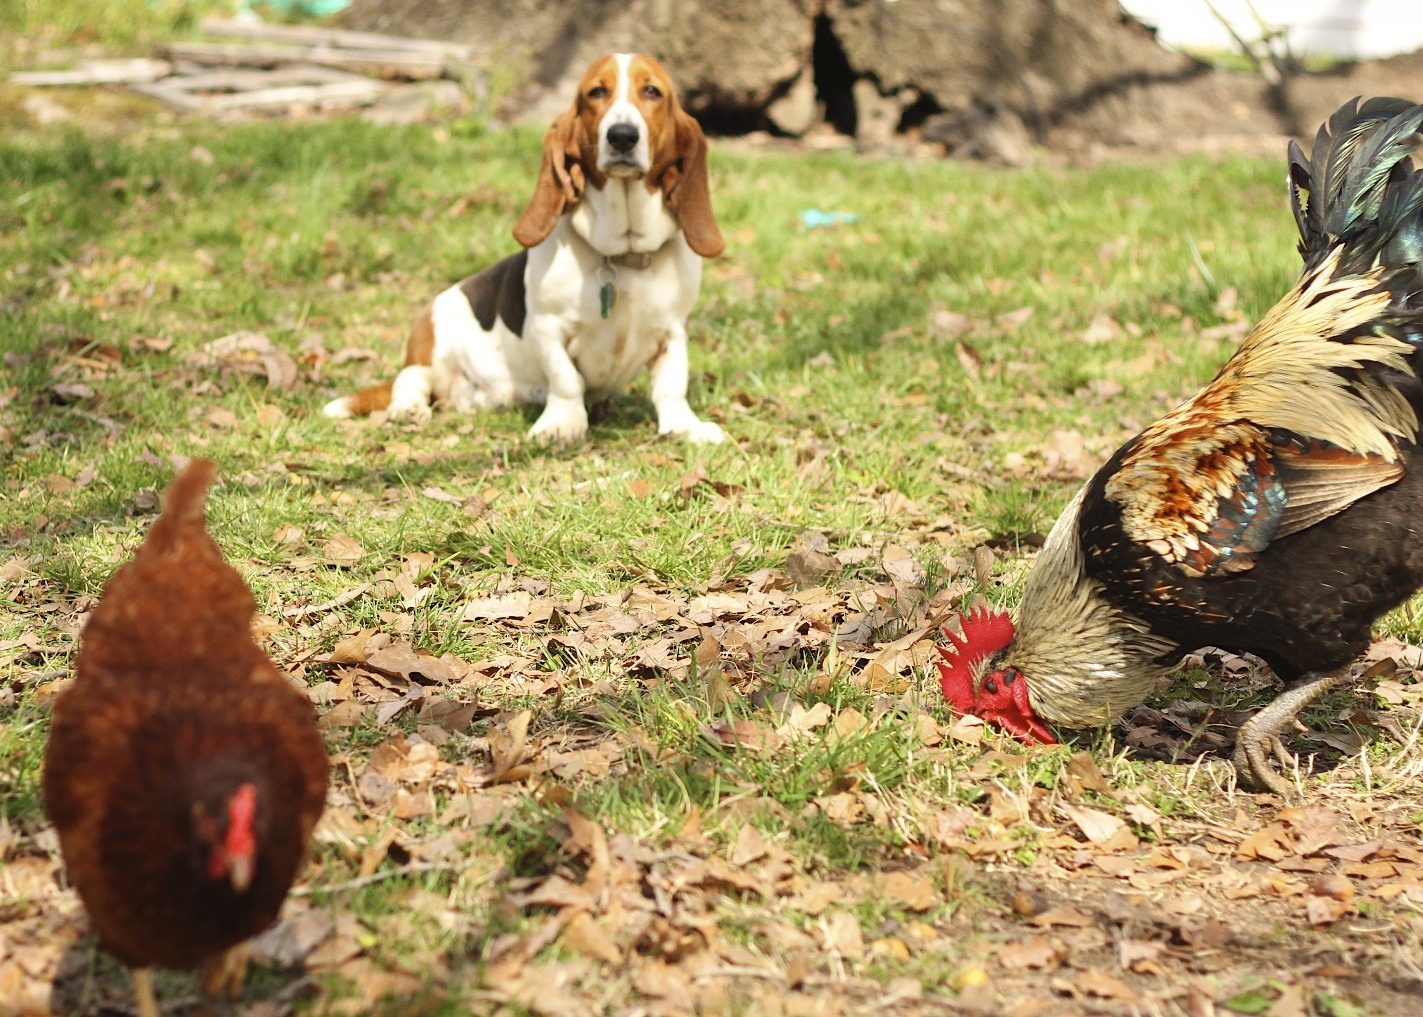 Our Basset Hound Daisy Mae watches over the chickens.